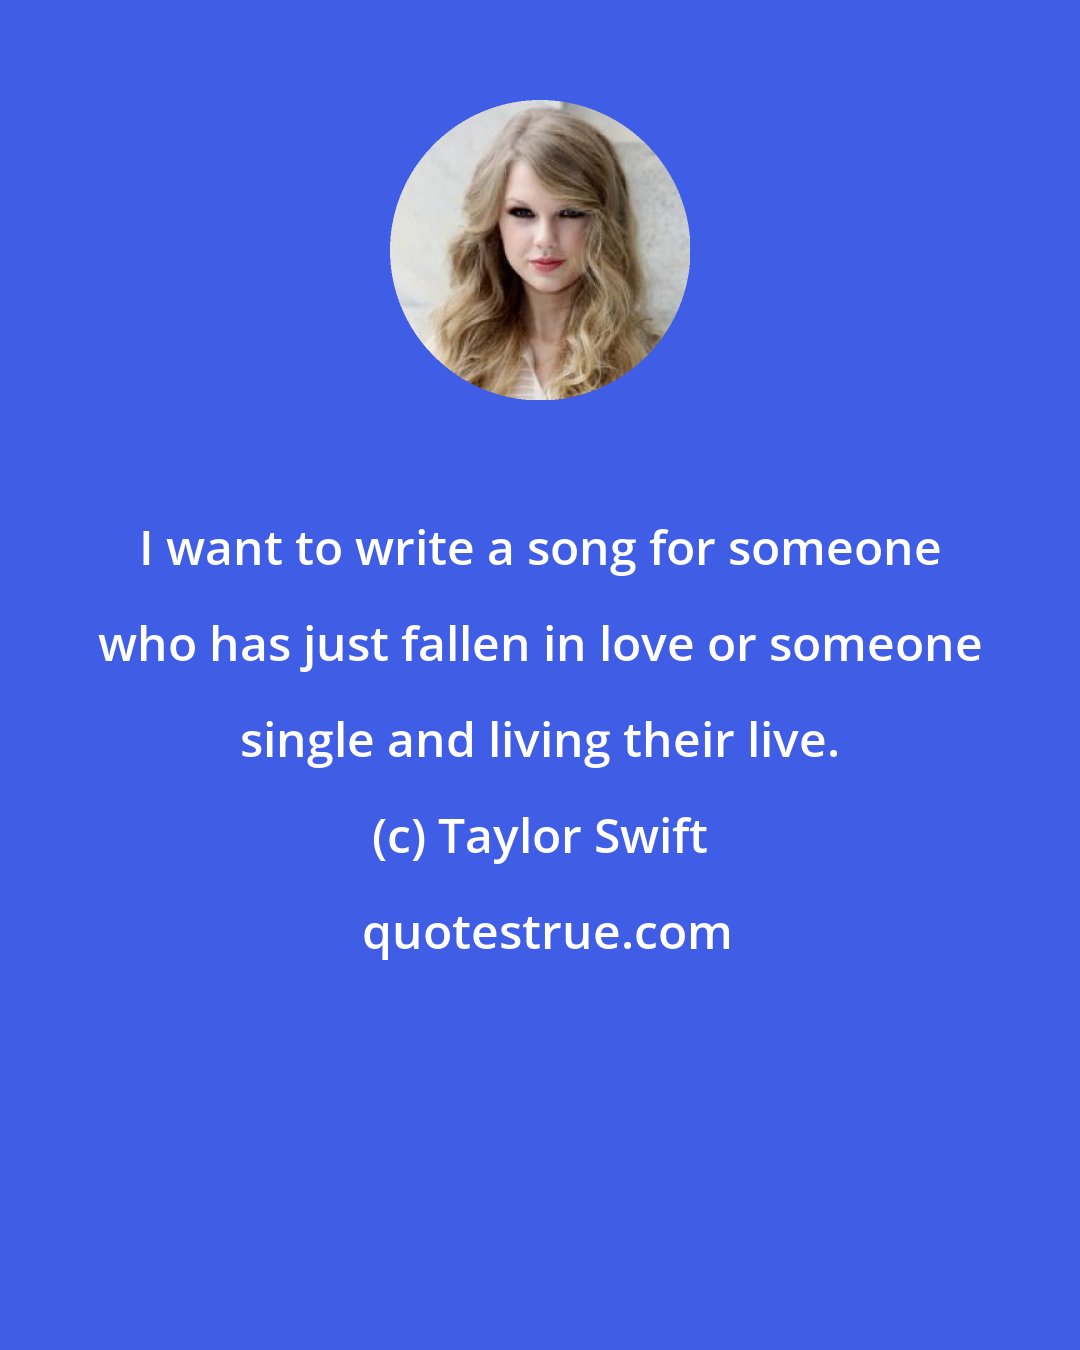 Taylor Swift: I want to write a song for someone who has just fallen in love or someone single and living their live.